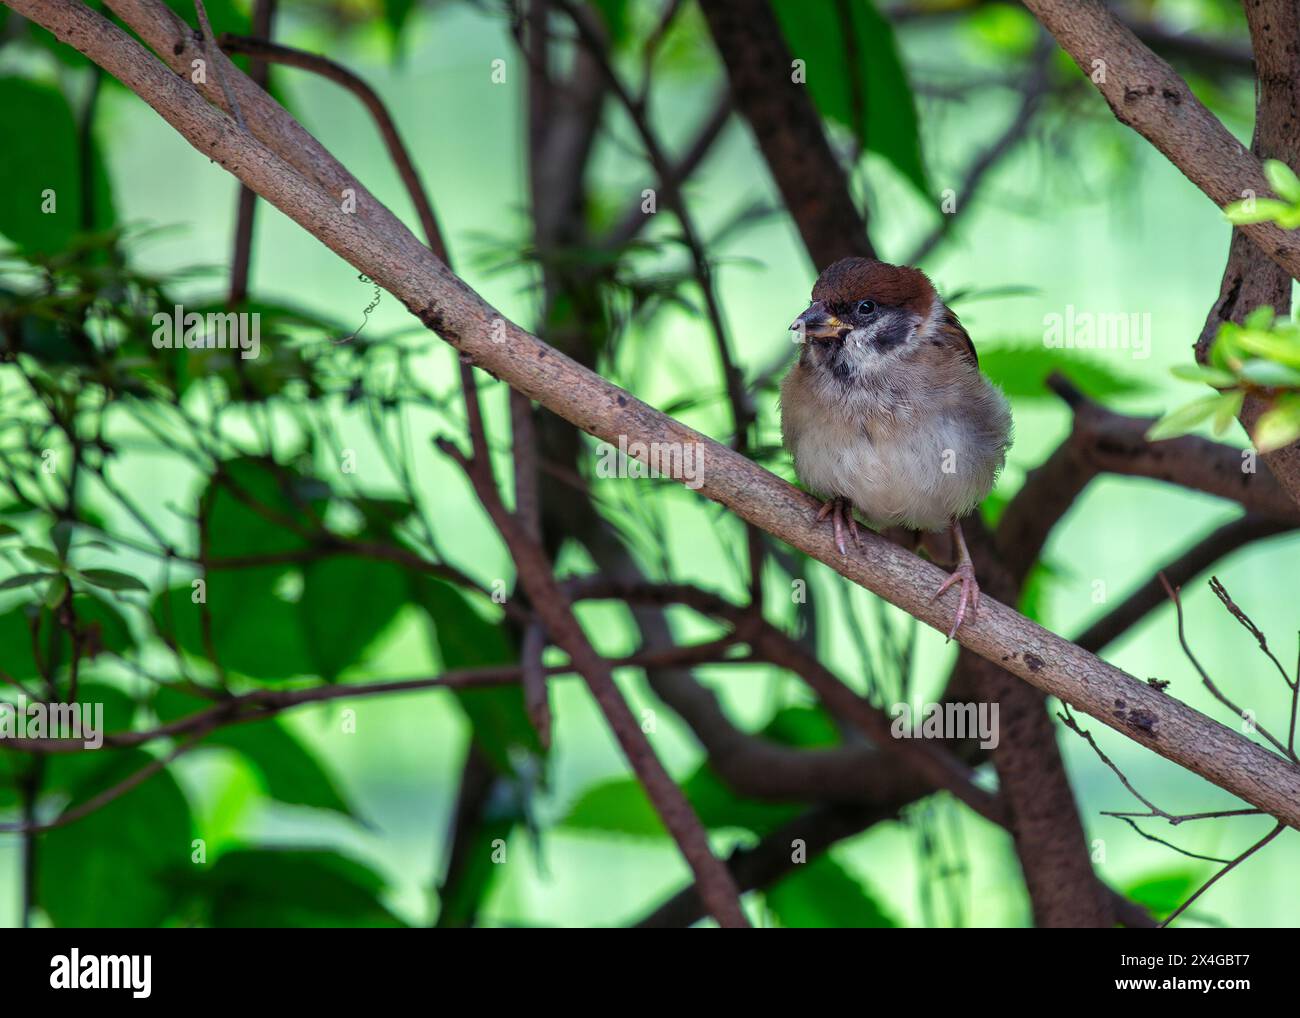 Small brown sparrow with black bib & chestnut cap. Thrives in London's parks, feasting on seeds & insects. Stock Photo